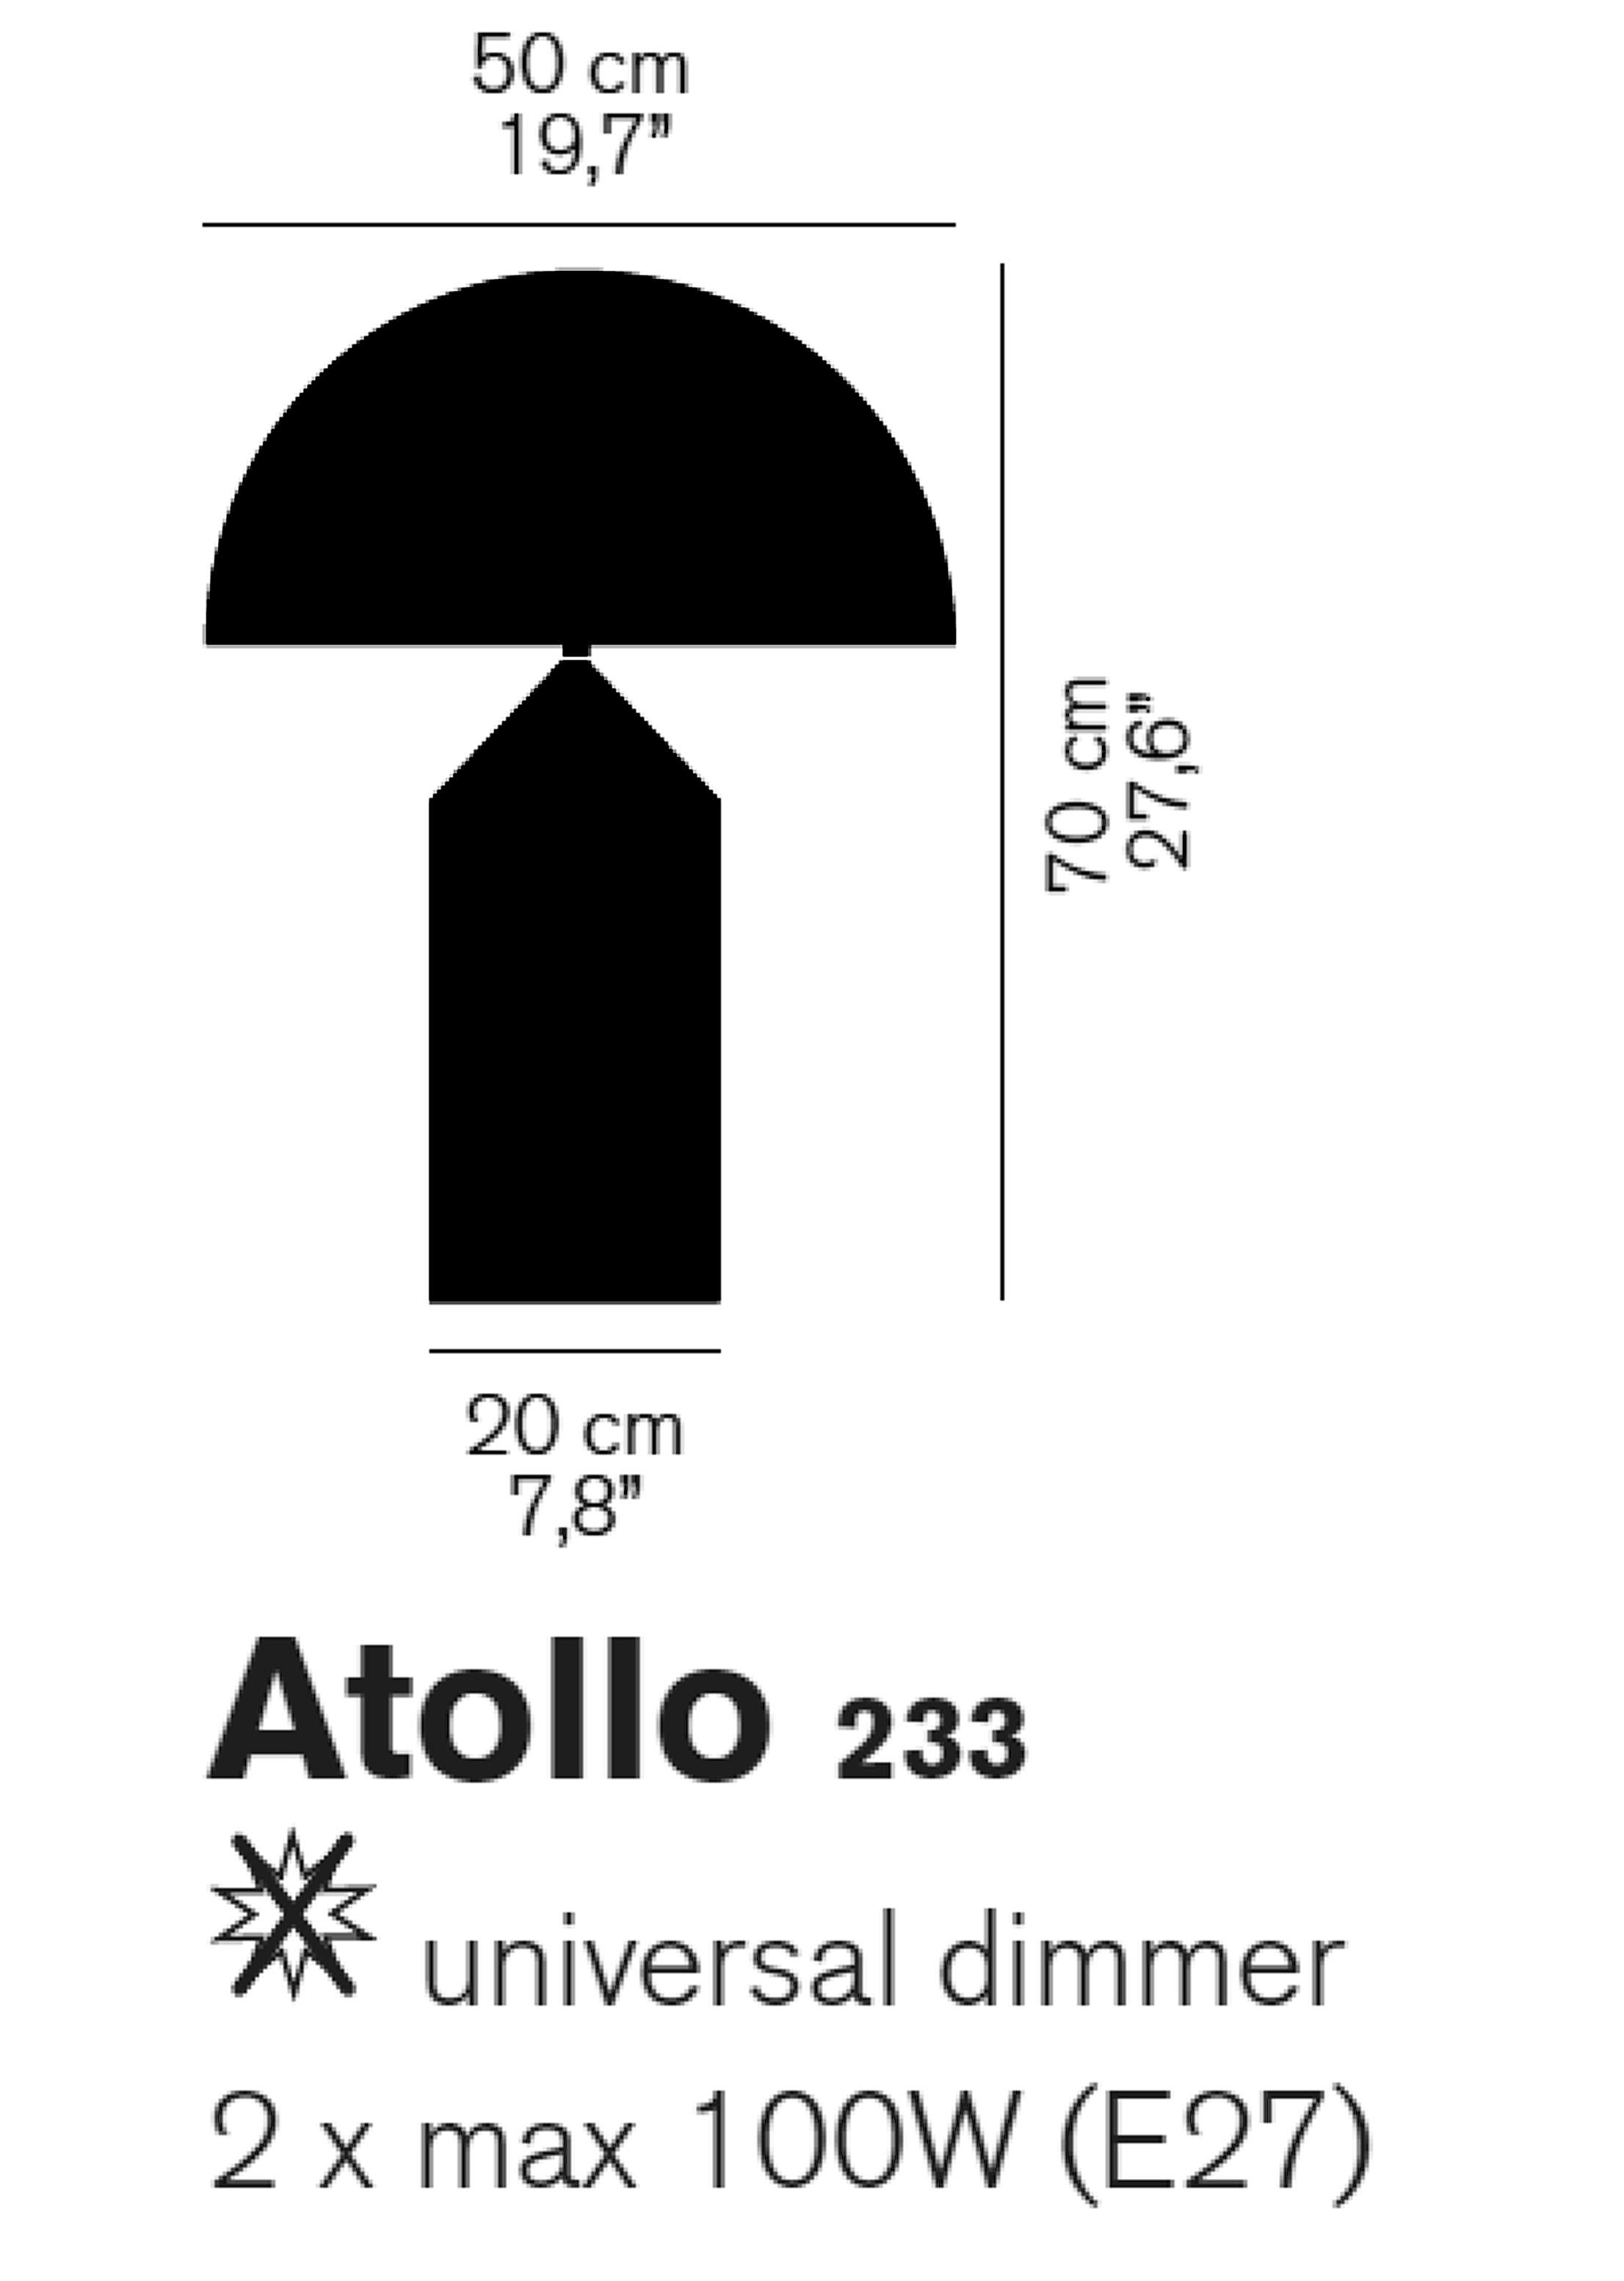 Metal Black/White Table Lamp Atollo 233 by Vico Magistretti for Oluce For Sale 2